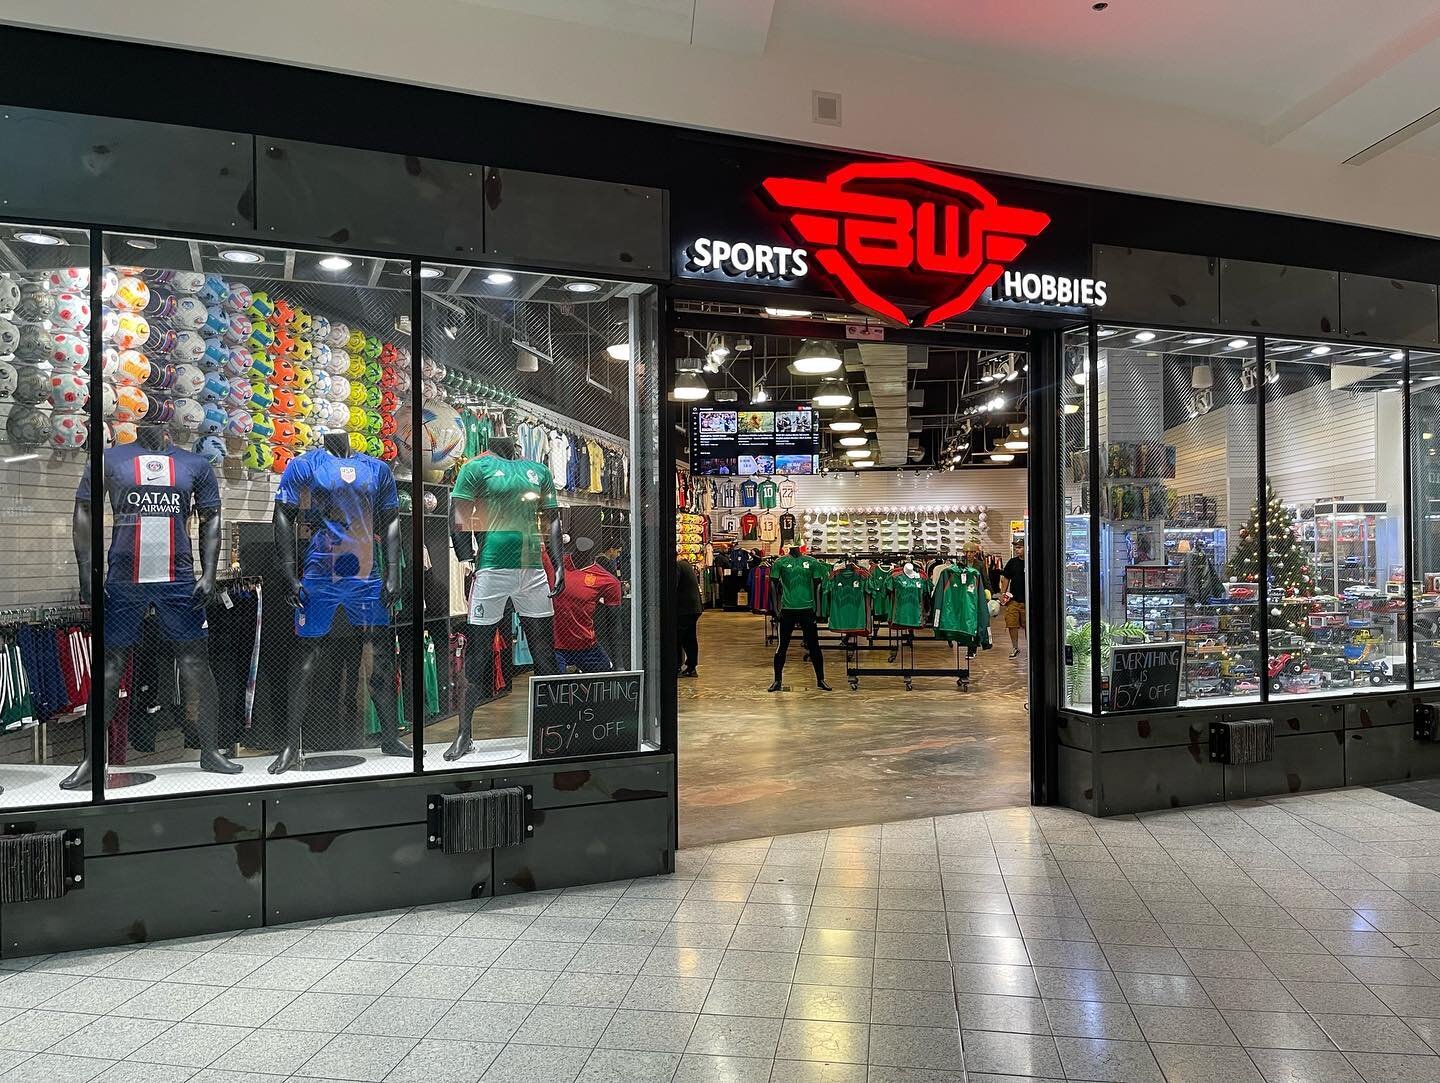 Hello family and friends,

Come and visit BW Sports &amp; Hobbies at their new location in Moreno Valley mall or Plaza Mexico in Lynwood. Come and get all your World Cup jerseys for the entire family and die cast collectibles. BW Sports &amp; Hobbies